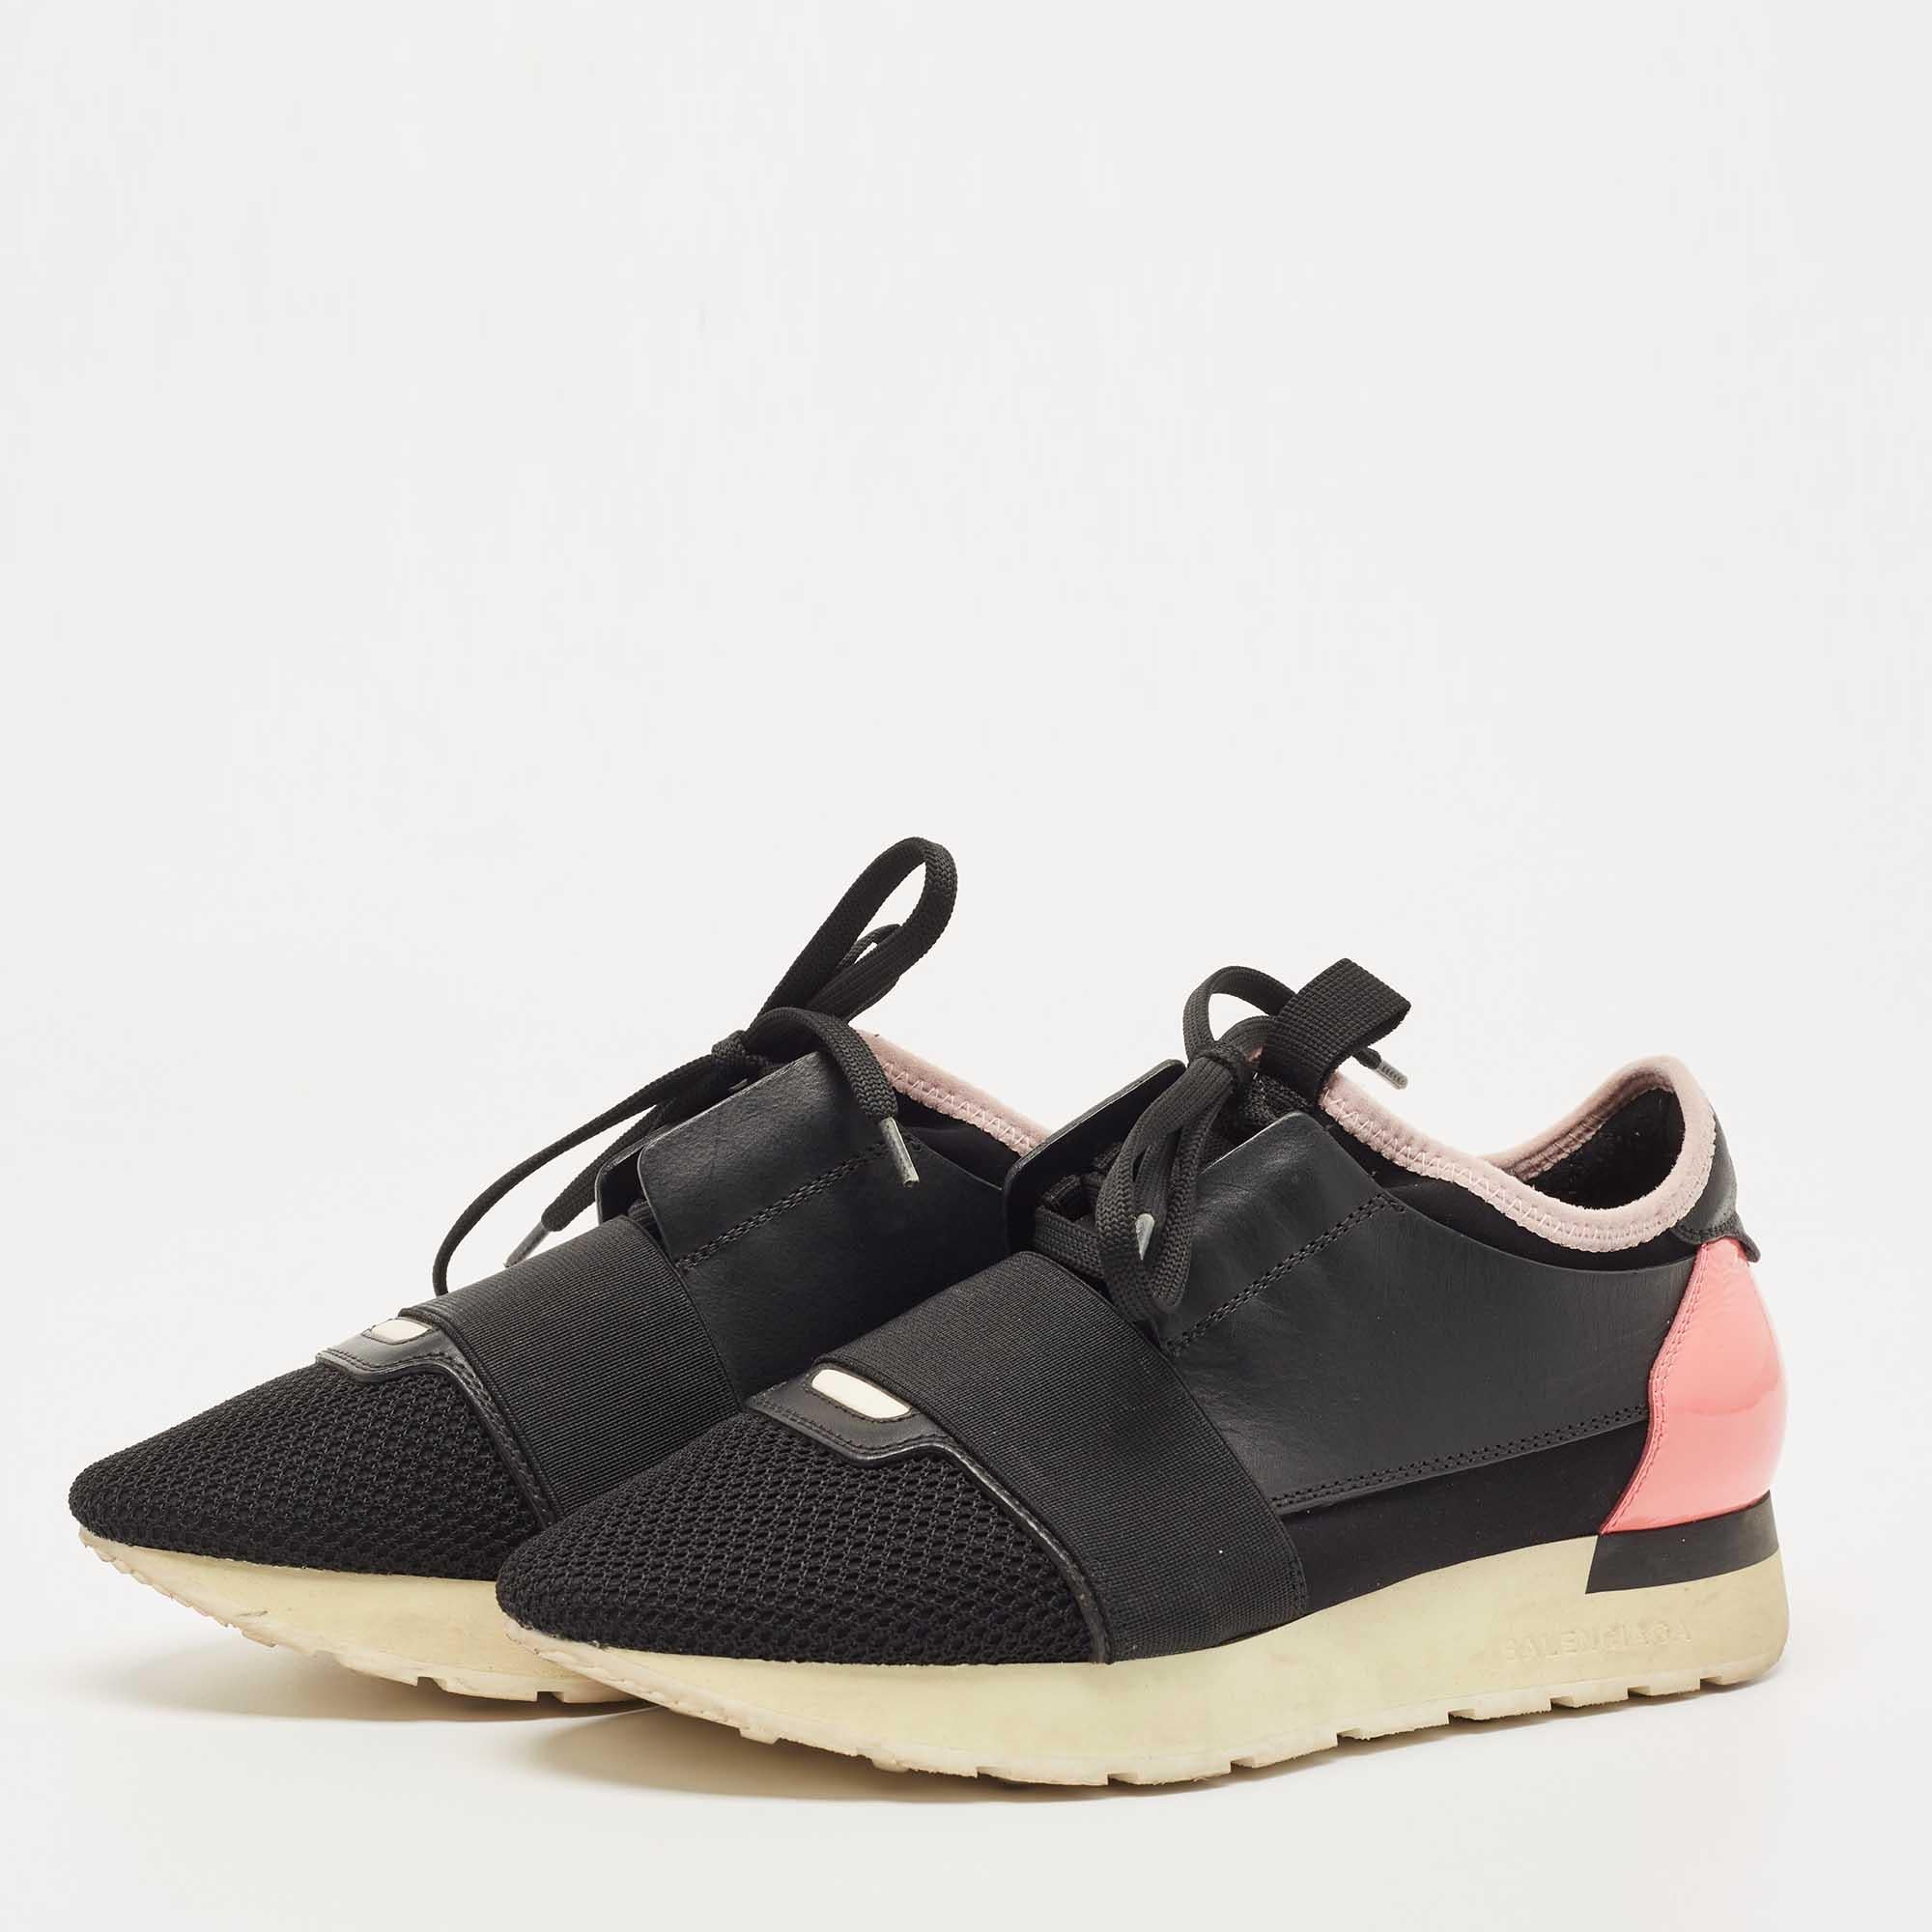 Balenciaga Black/Pink Leather and Mesh Race Runner Sneakers In Good Condition For Sale In Dubai, Al Qouz 2